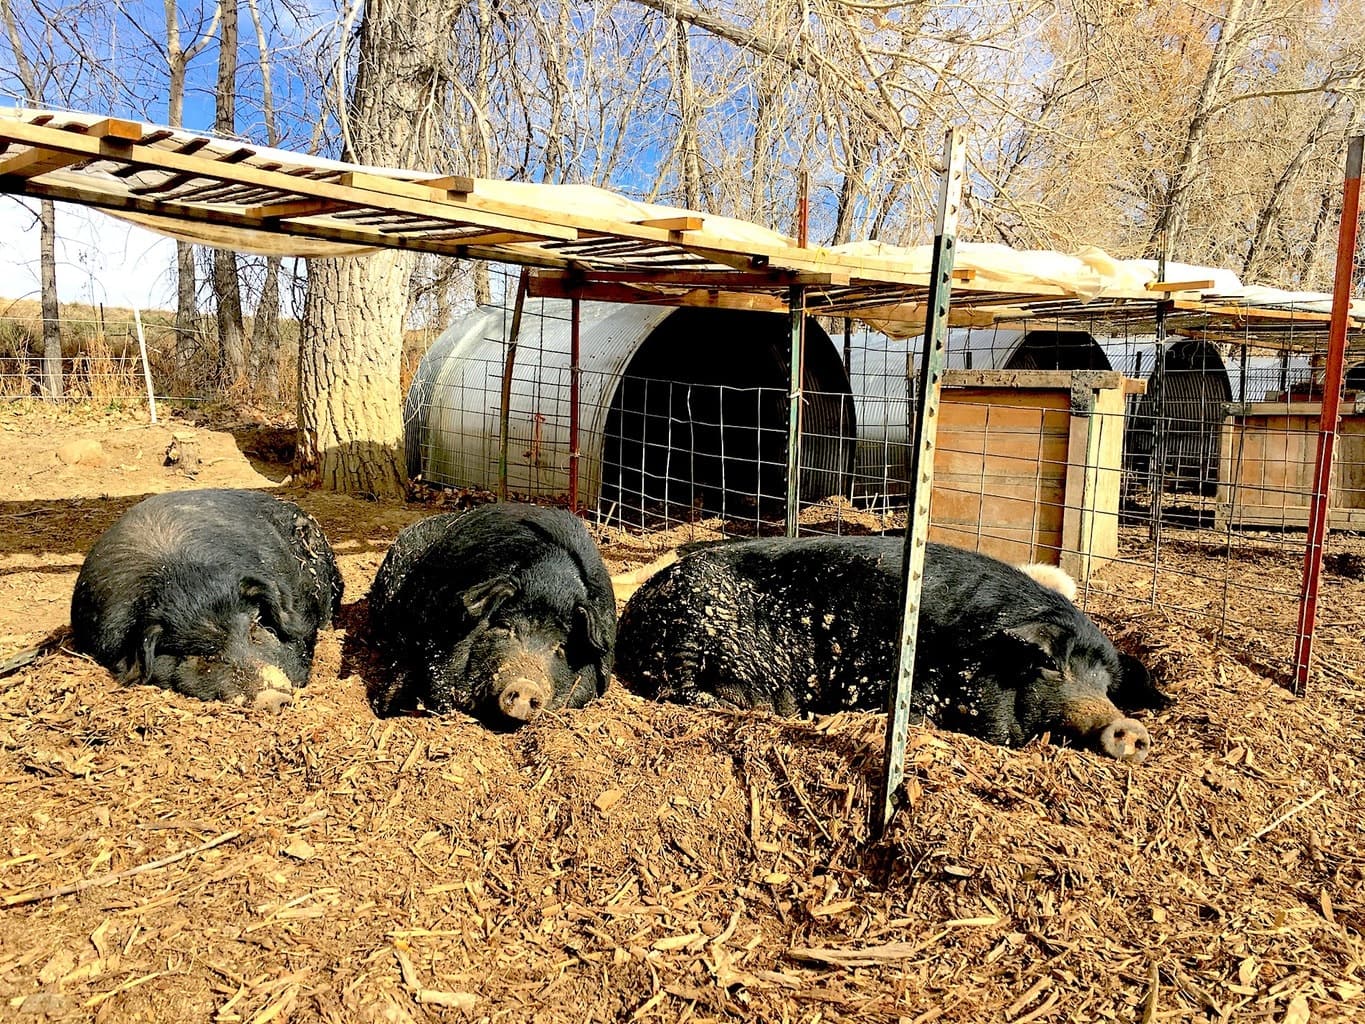 Mulefoot pigs sleeping at Black Cat Farm. The pigs are one of the foundations of the entire farm-to-table, biodynamic and certified organic operation.